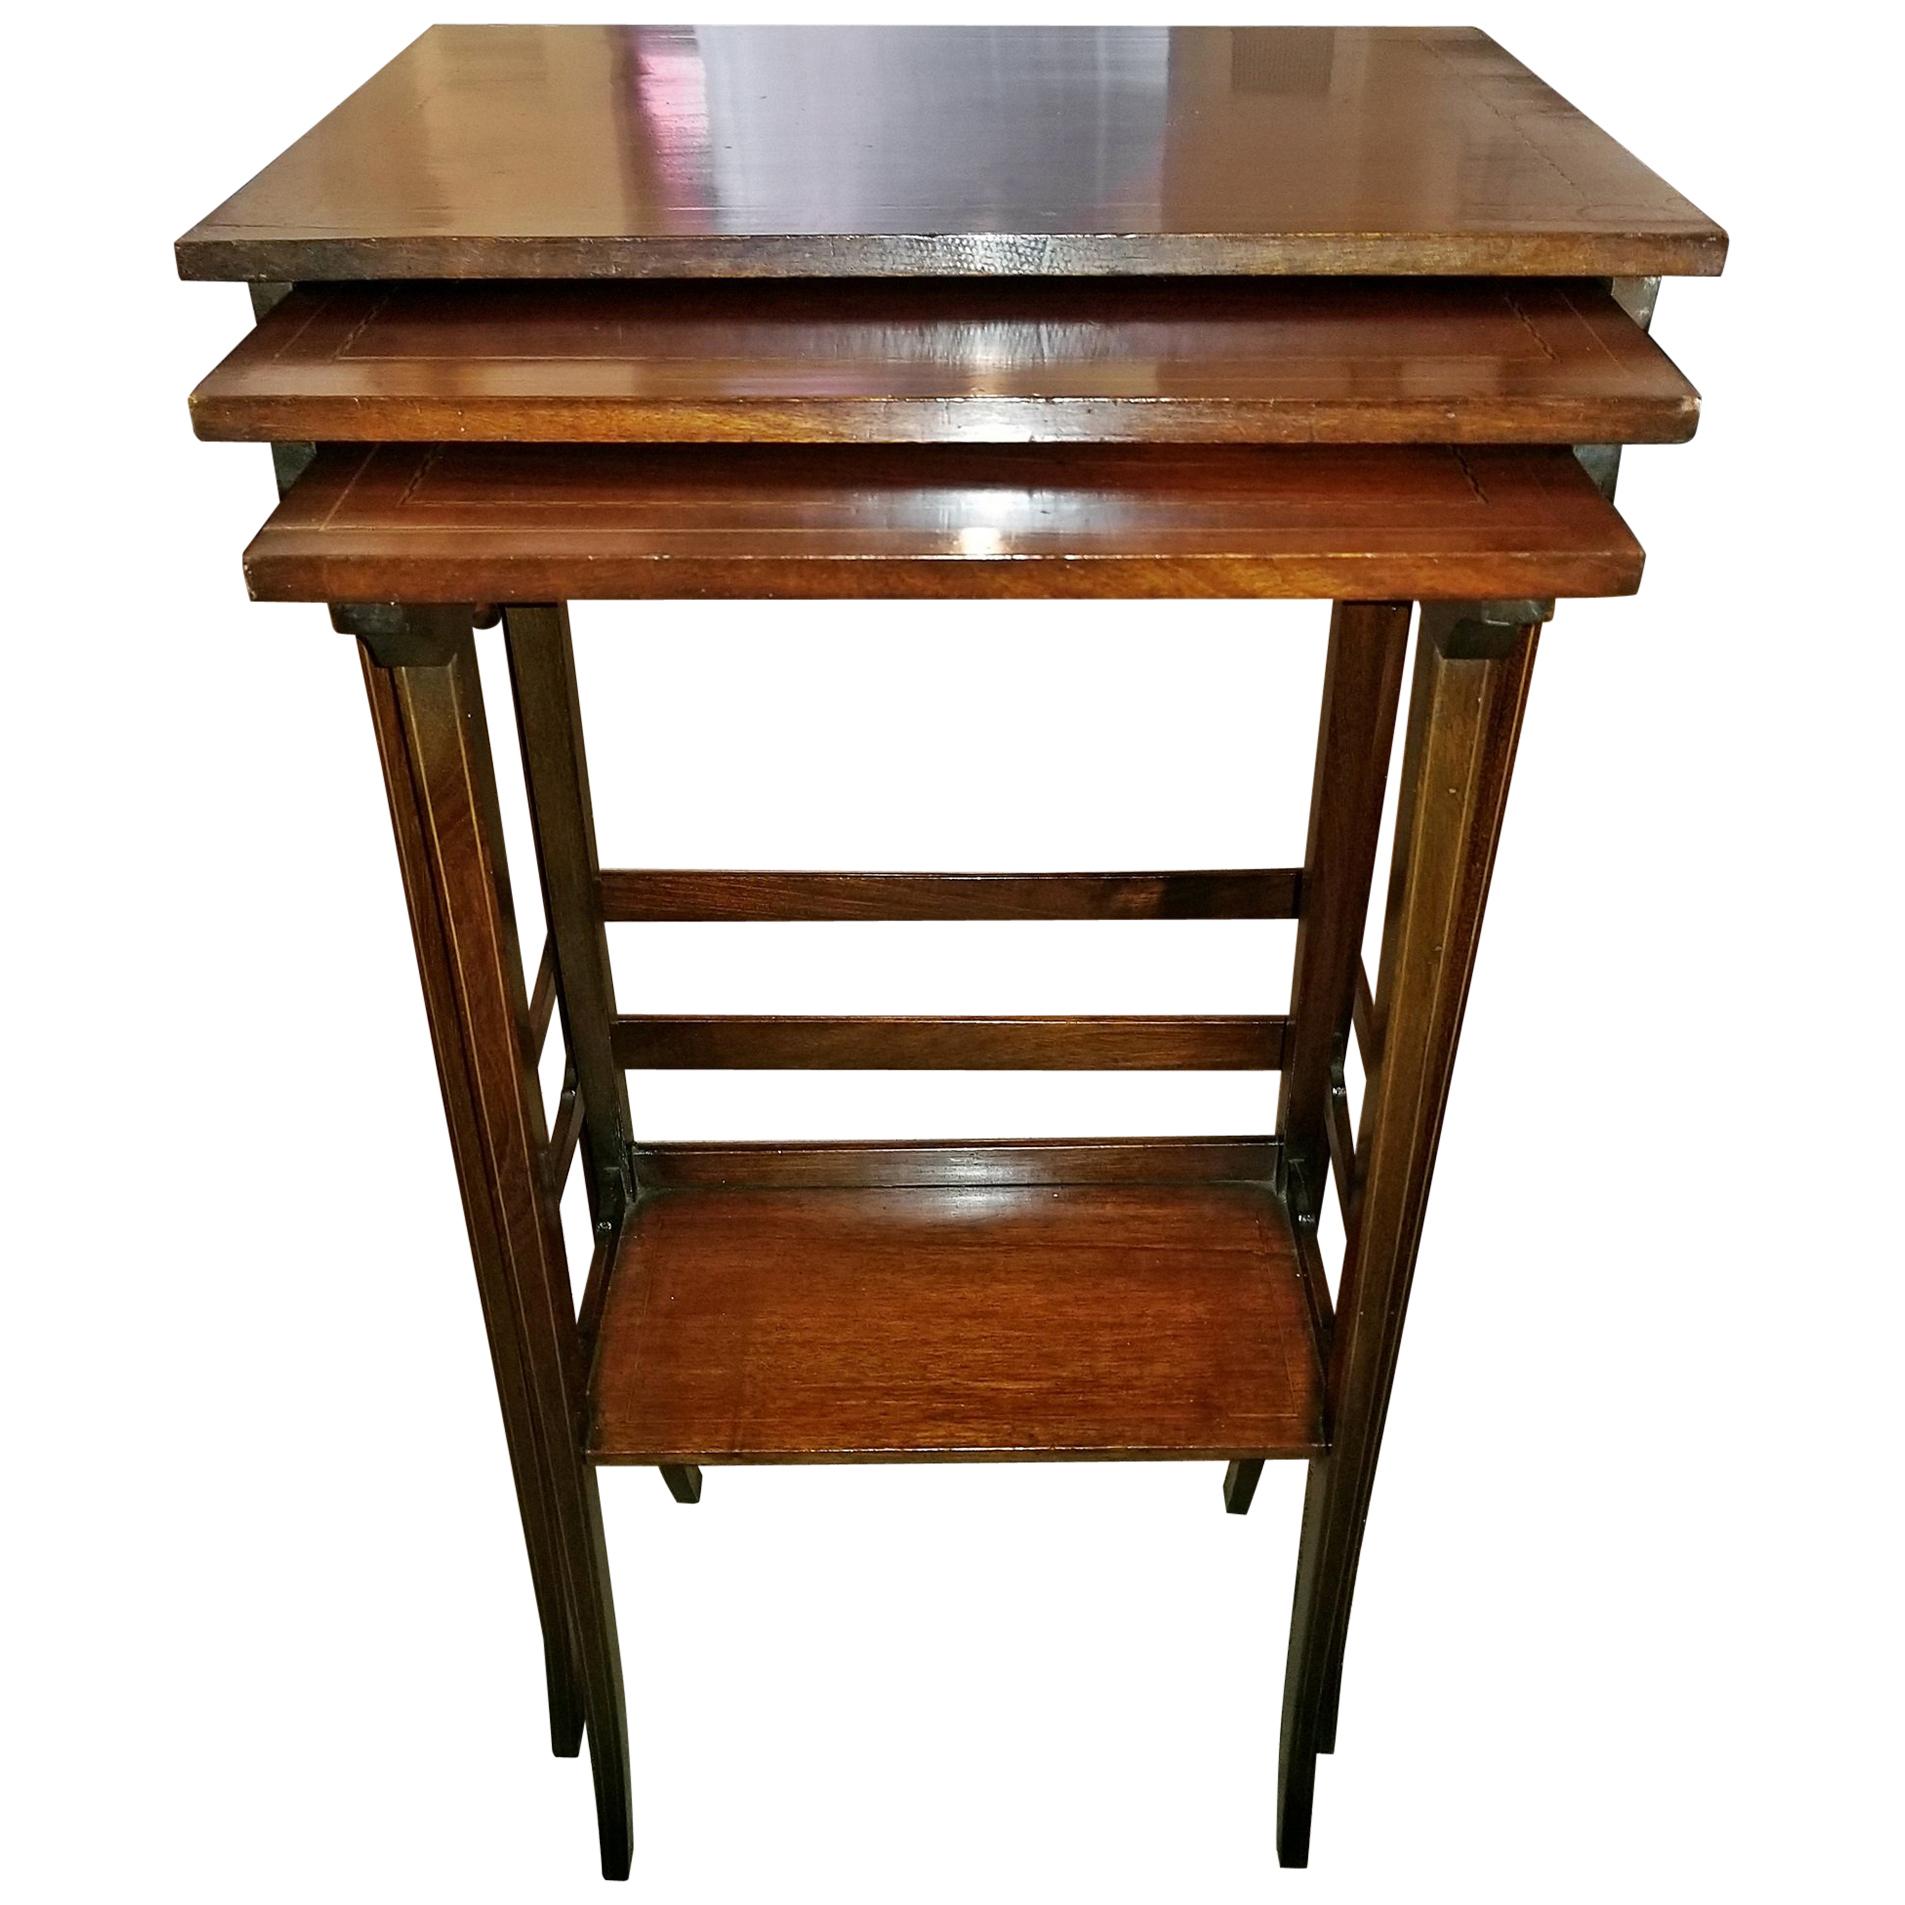 Early 20th Century British Mahogany and Inlaid Nest of Tables